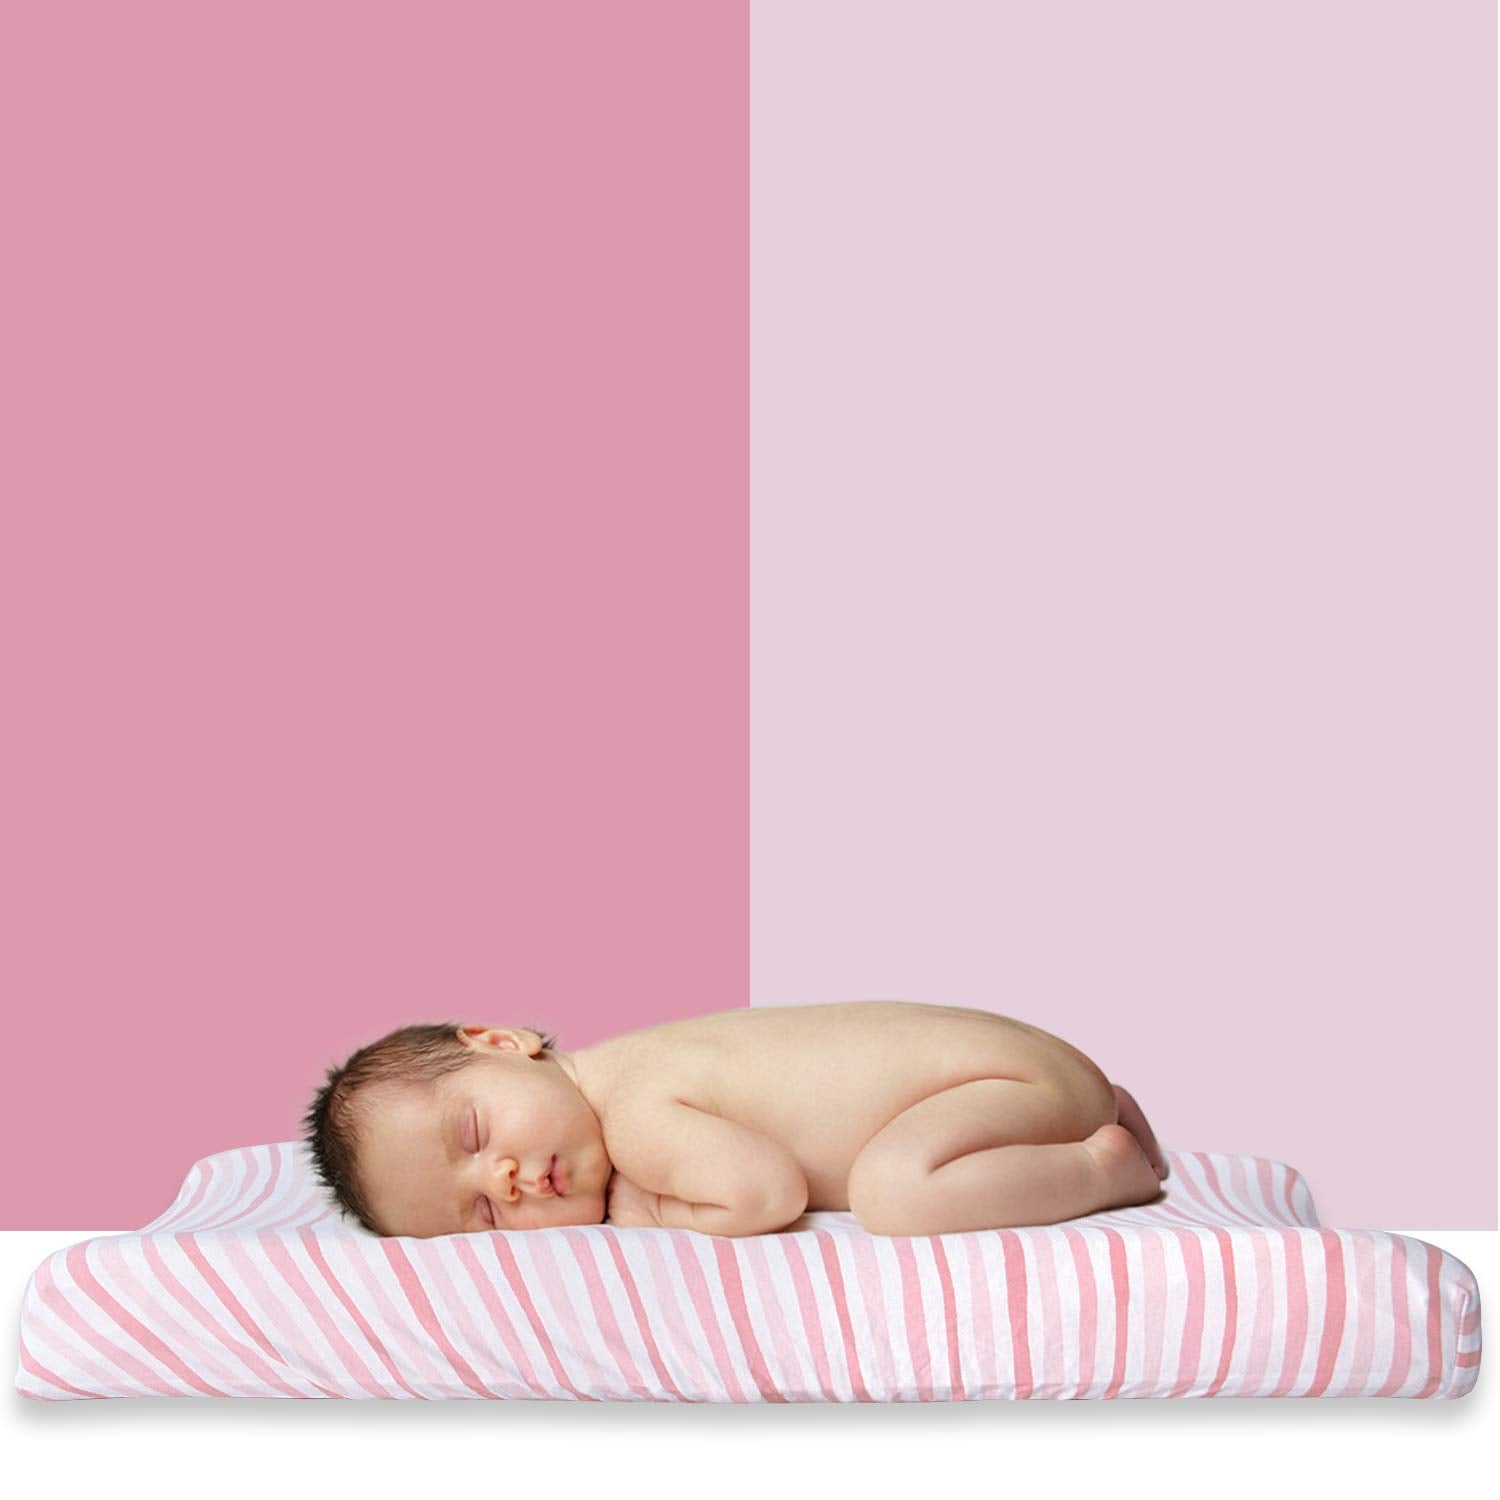 Changing Pad Cover - 2 Pack, Ultra Soft 100% Jersey Knit Cotton, Pink & White - Biloban Online Store